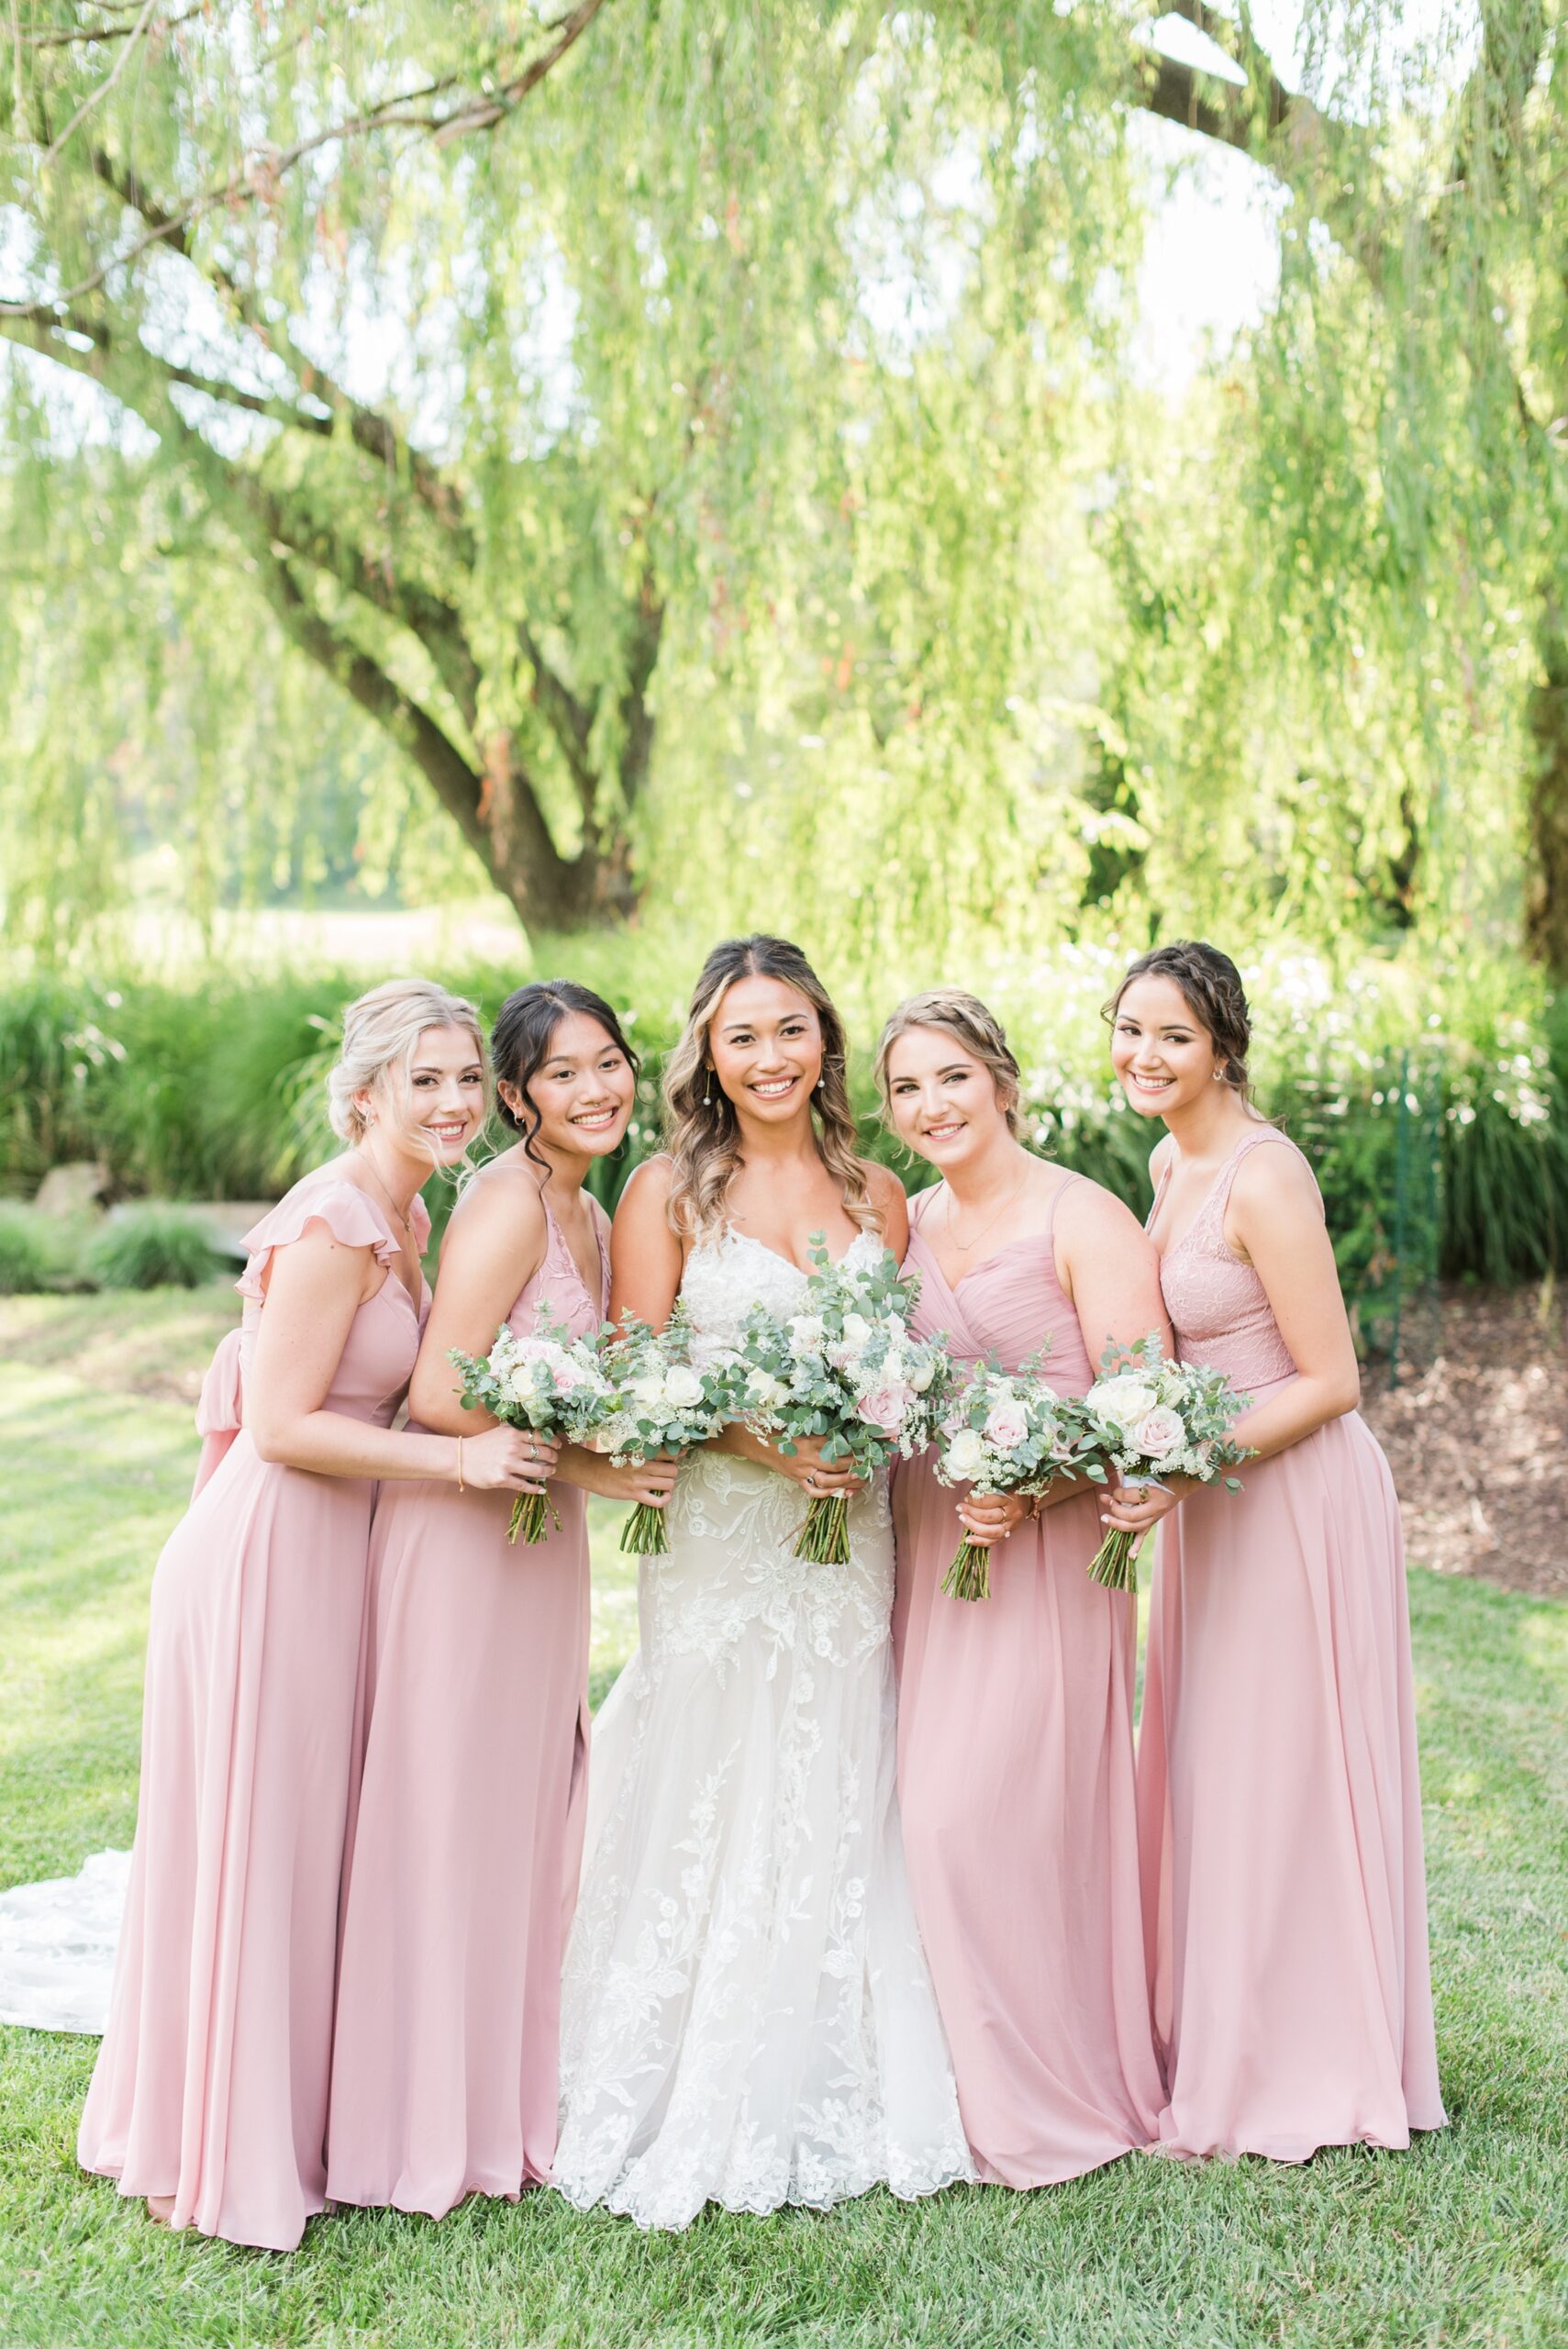 A bride and her bridesmaids in pink dresses stand together smiling and holding their bouquets under a willow tree in a garden